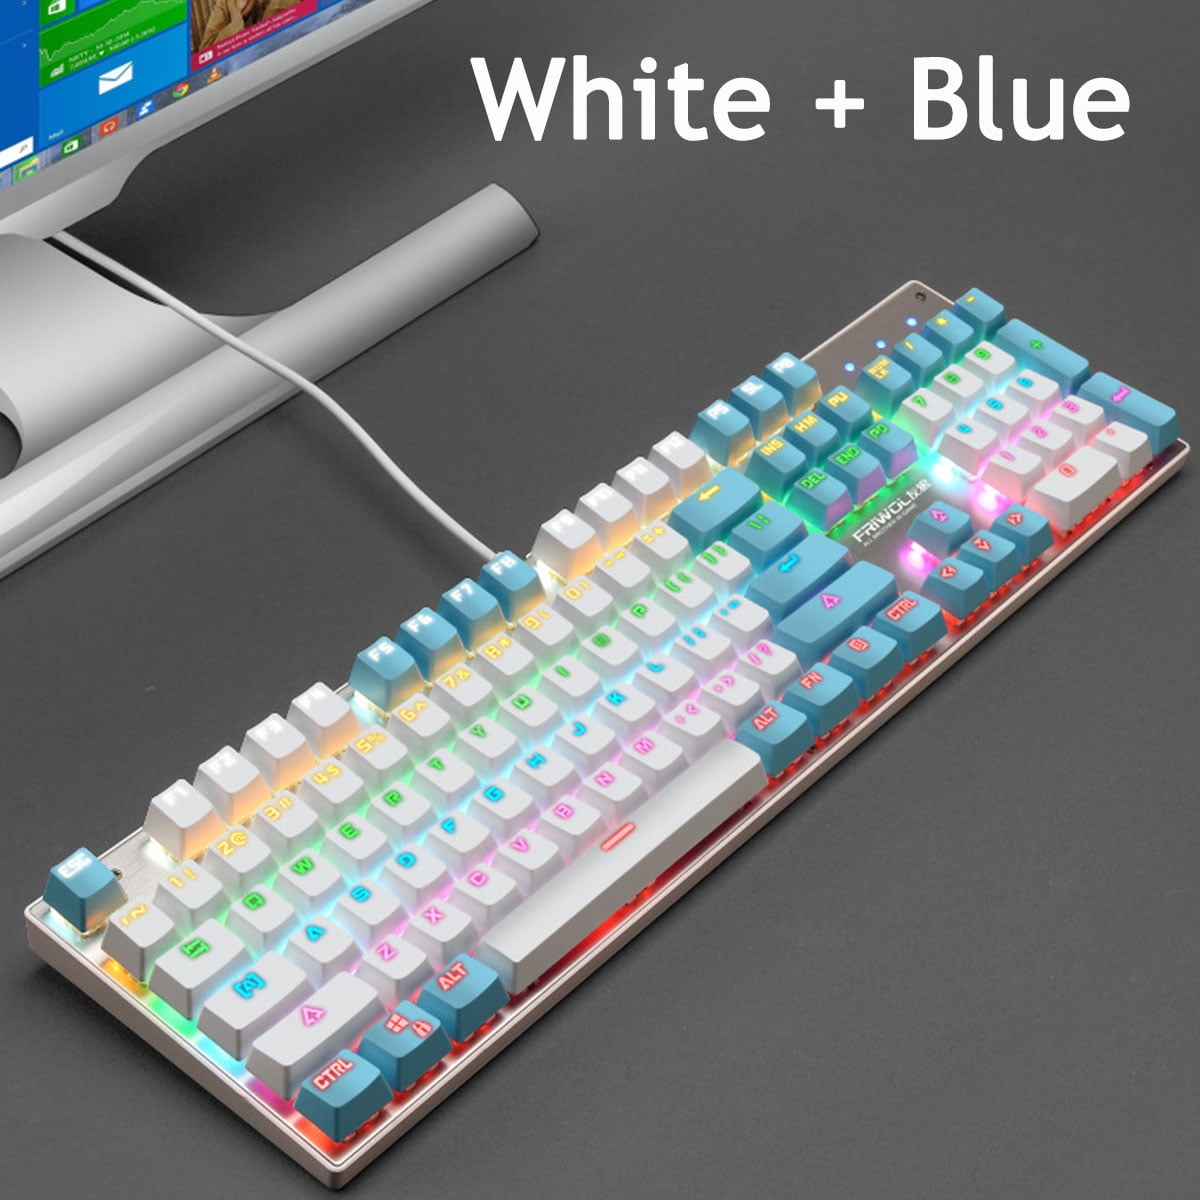 USB Wired 19-Key Mini Numeric Keyboard Plug and Play for Bank/Office or Market Mechanical Hand Feeling 30 Functions Waterproof Non-Slip Sensitive